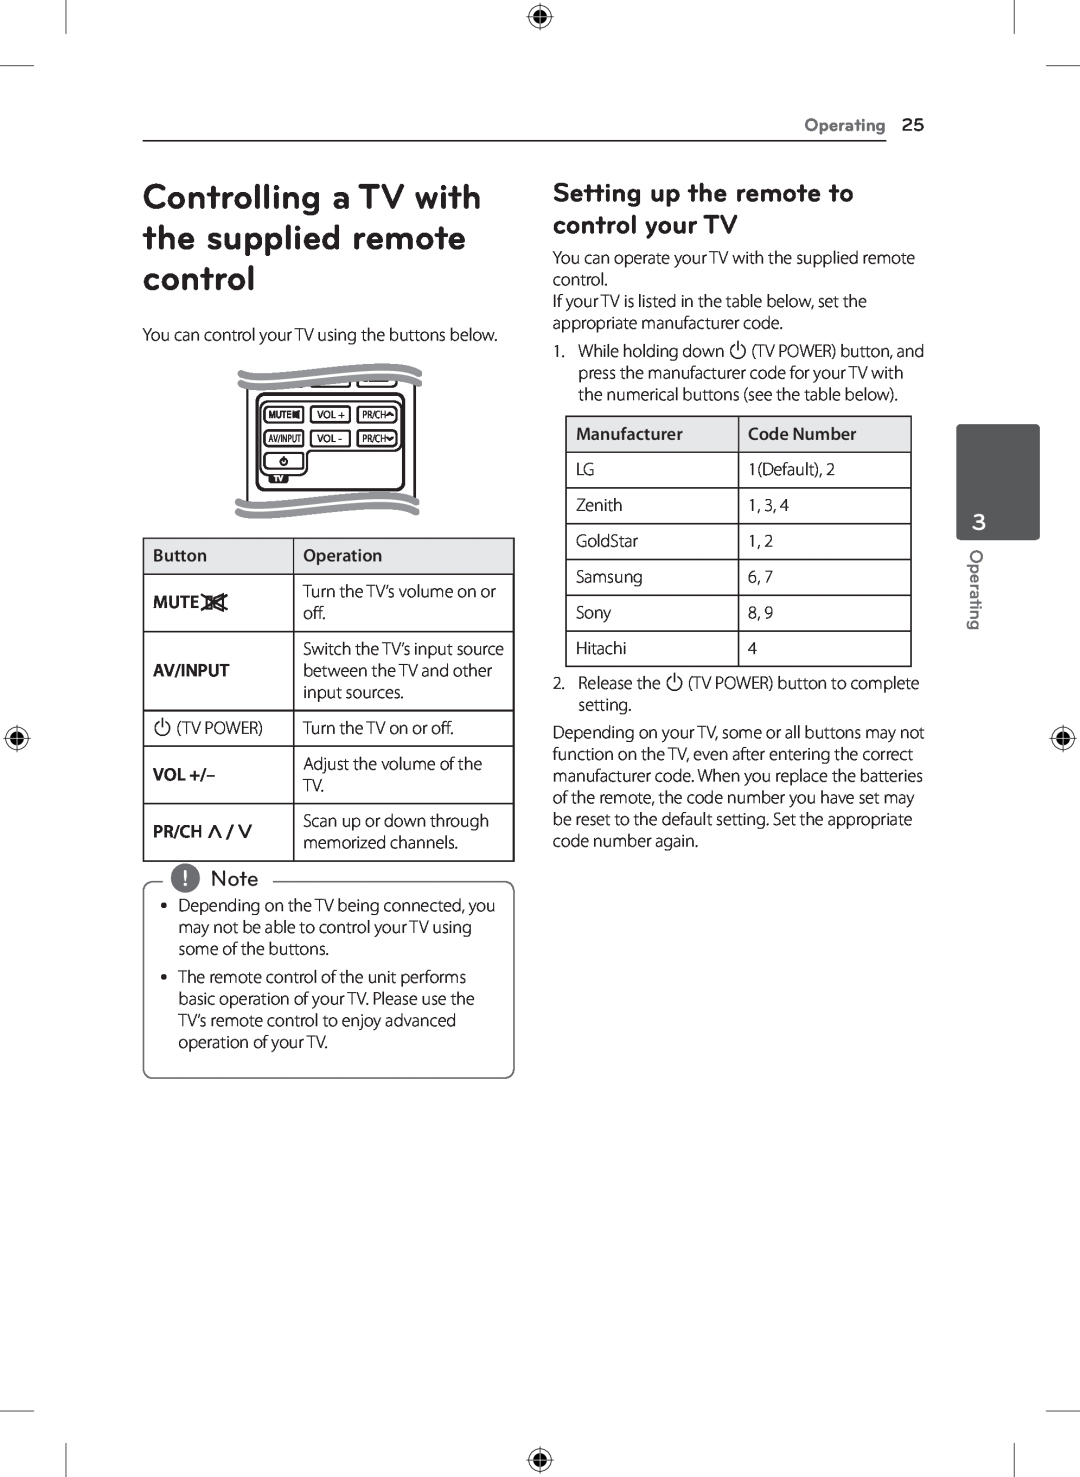 LG Electronics NB4530A Controlling a TV with the supplied remote control, Setting up the remote to control your TV, Button 